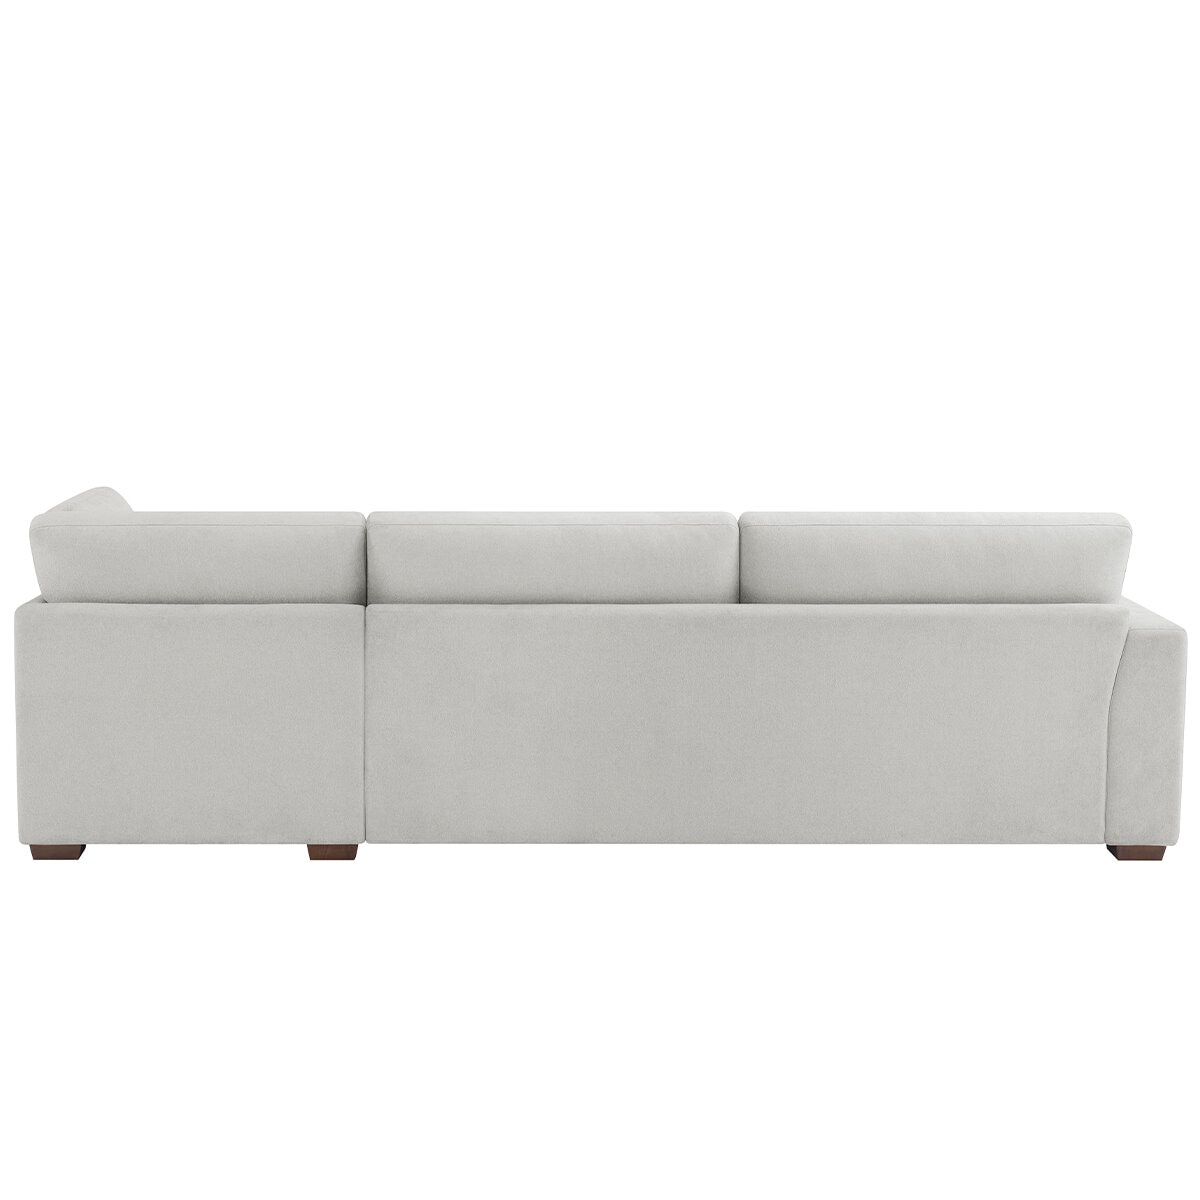 Thomasville 2 Piece Fabric Convertible Sectional With Chaise